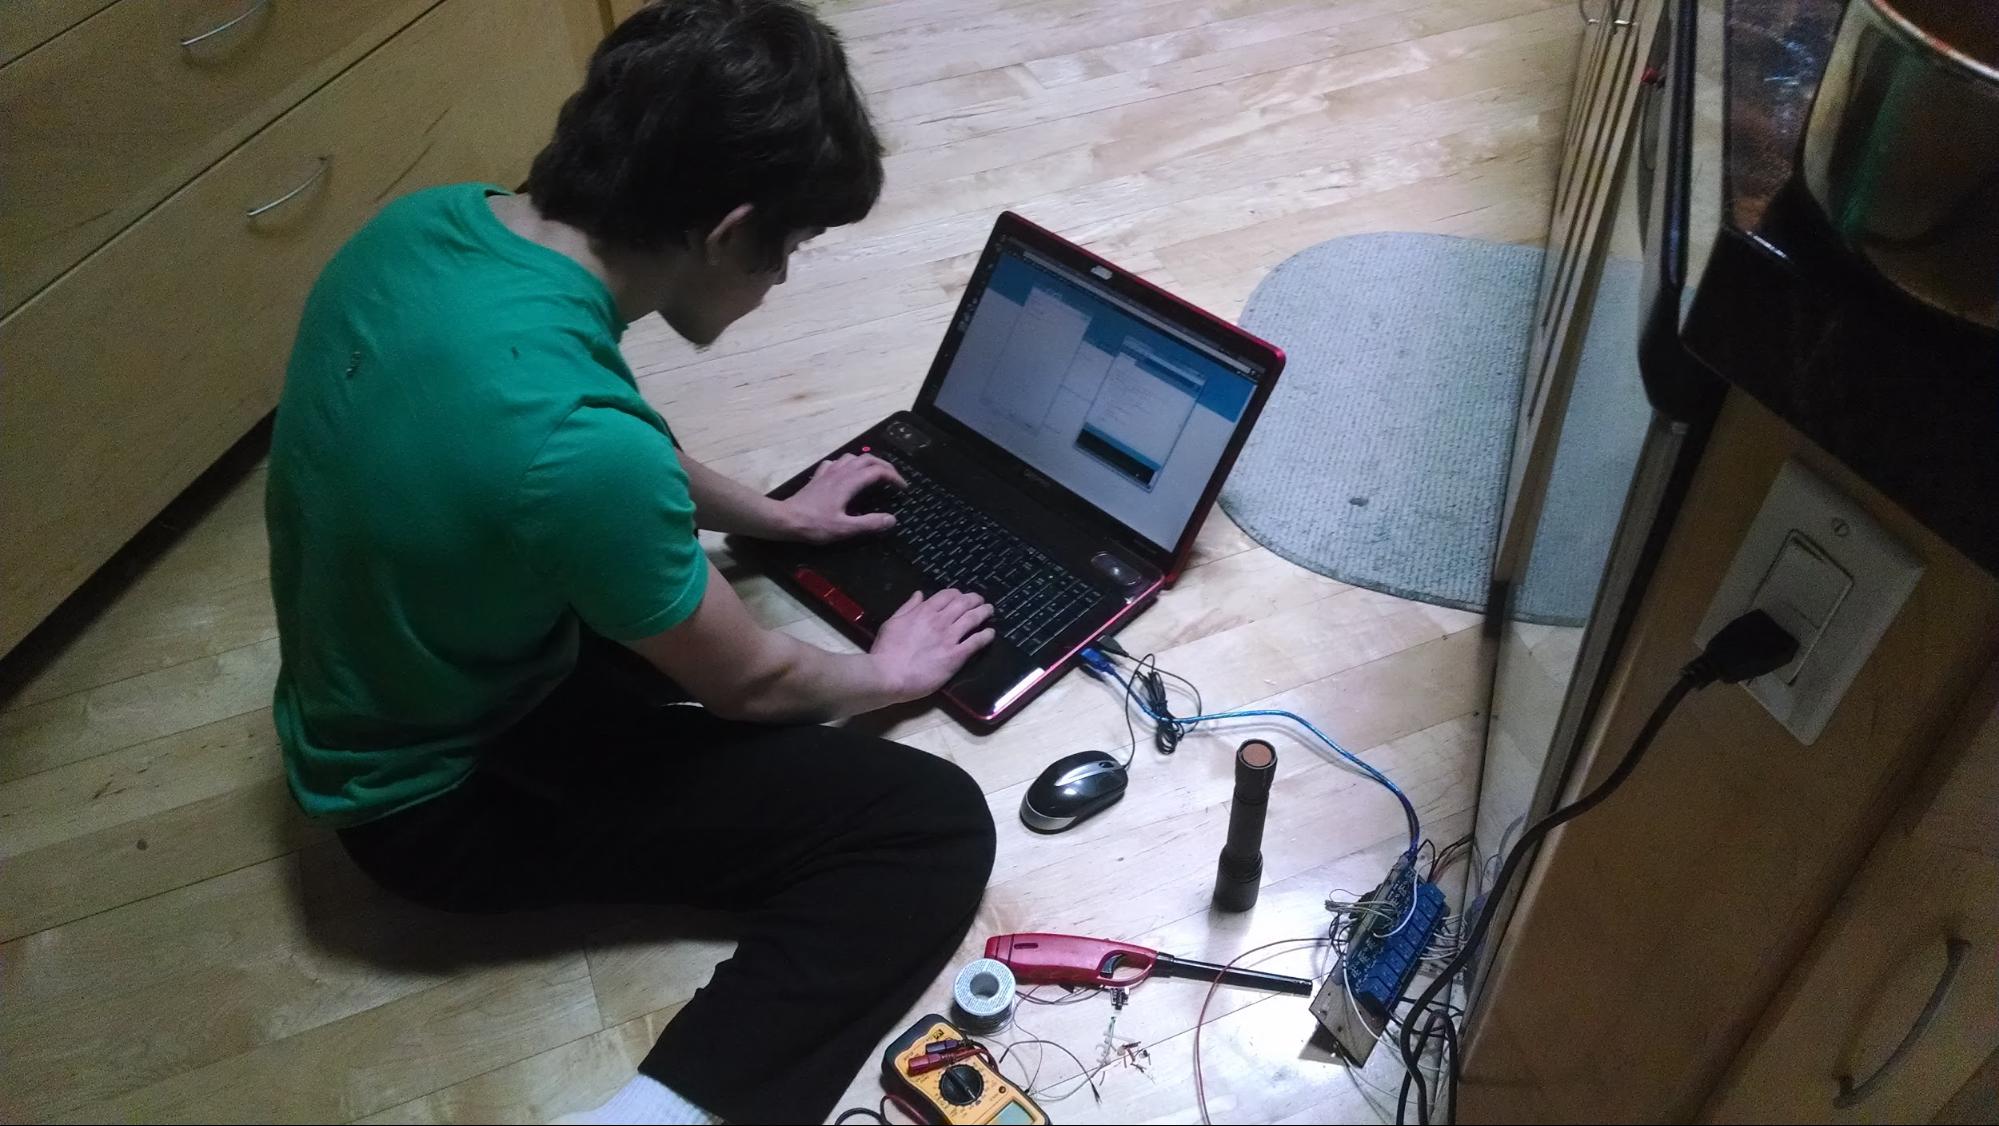 Me sitting on the floor with my laptop programming the dishasher controller